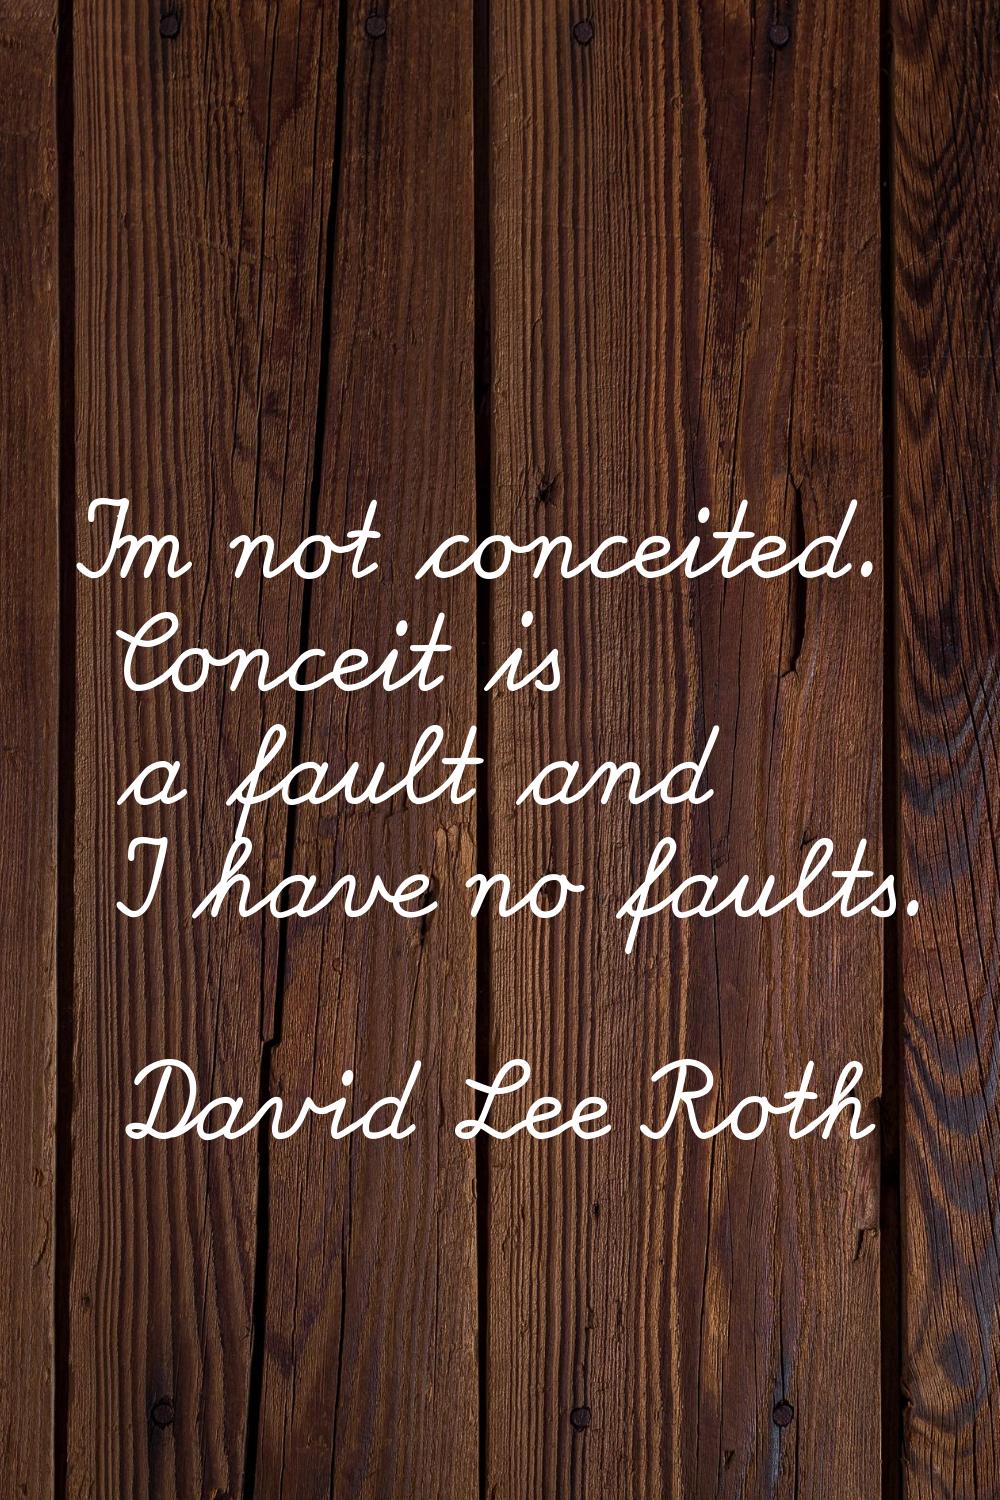 I'm not conceited. Conceit is a fault and I have no faults.